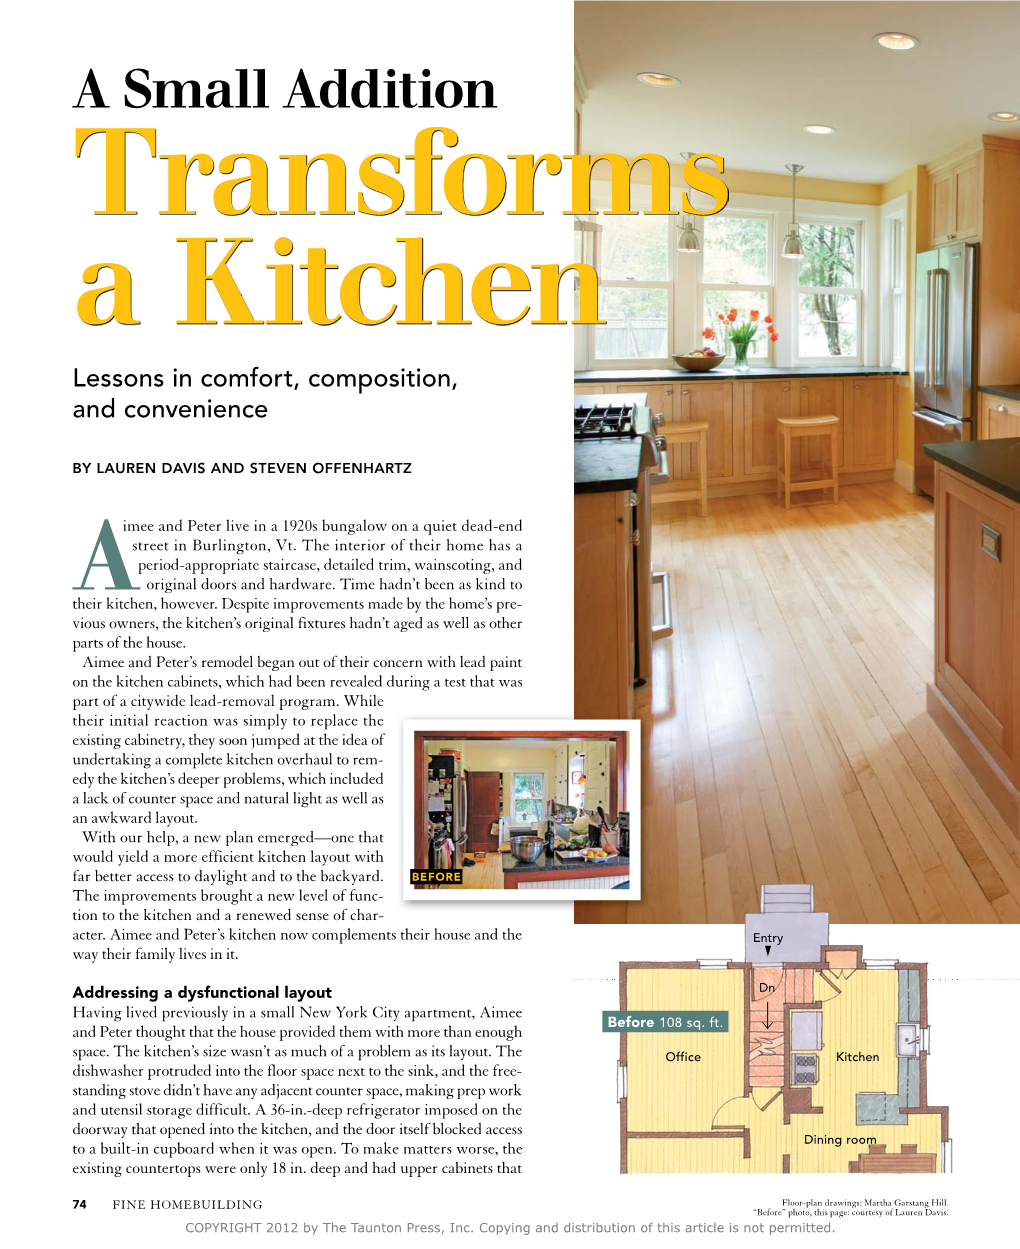 A Small Addition Transforms a Kitchen Lessons in Comfort, Composition, and Convenience